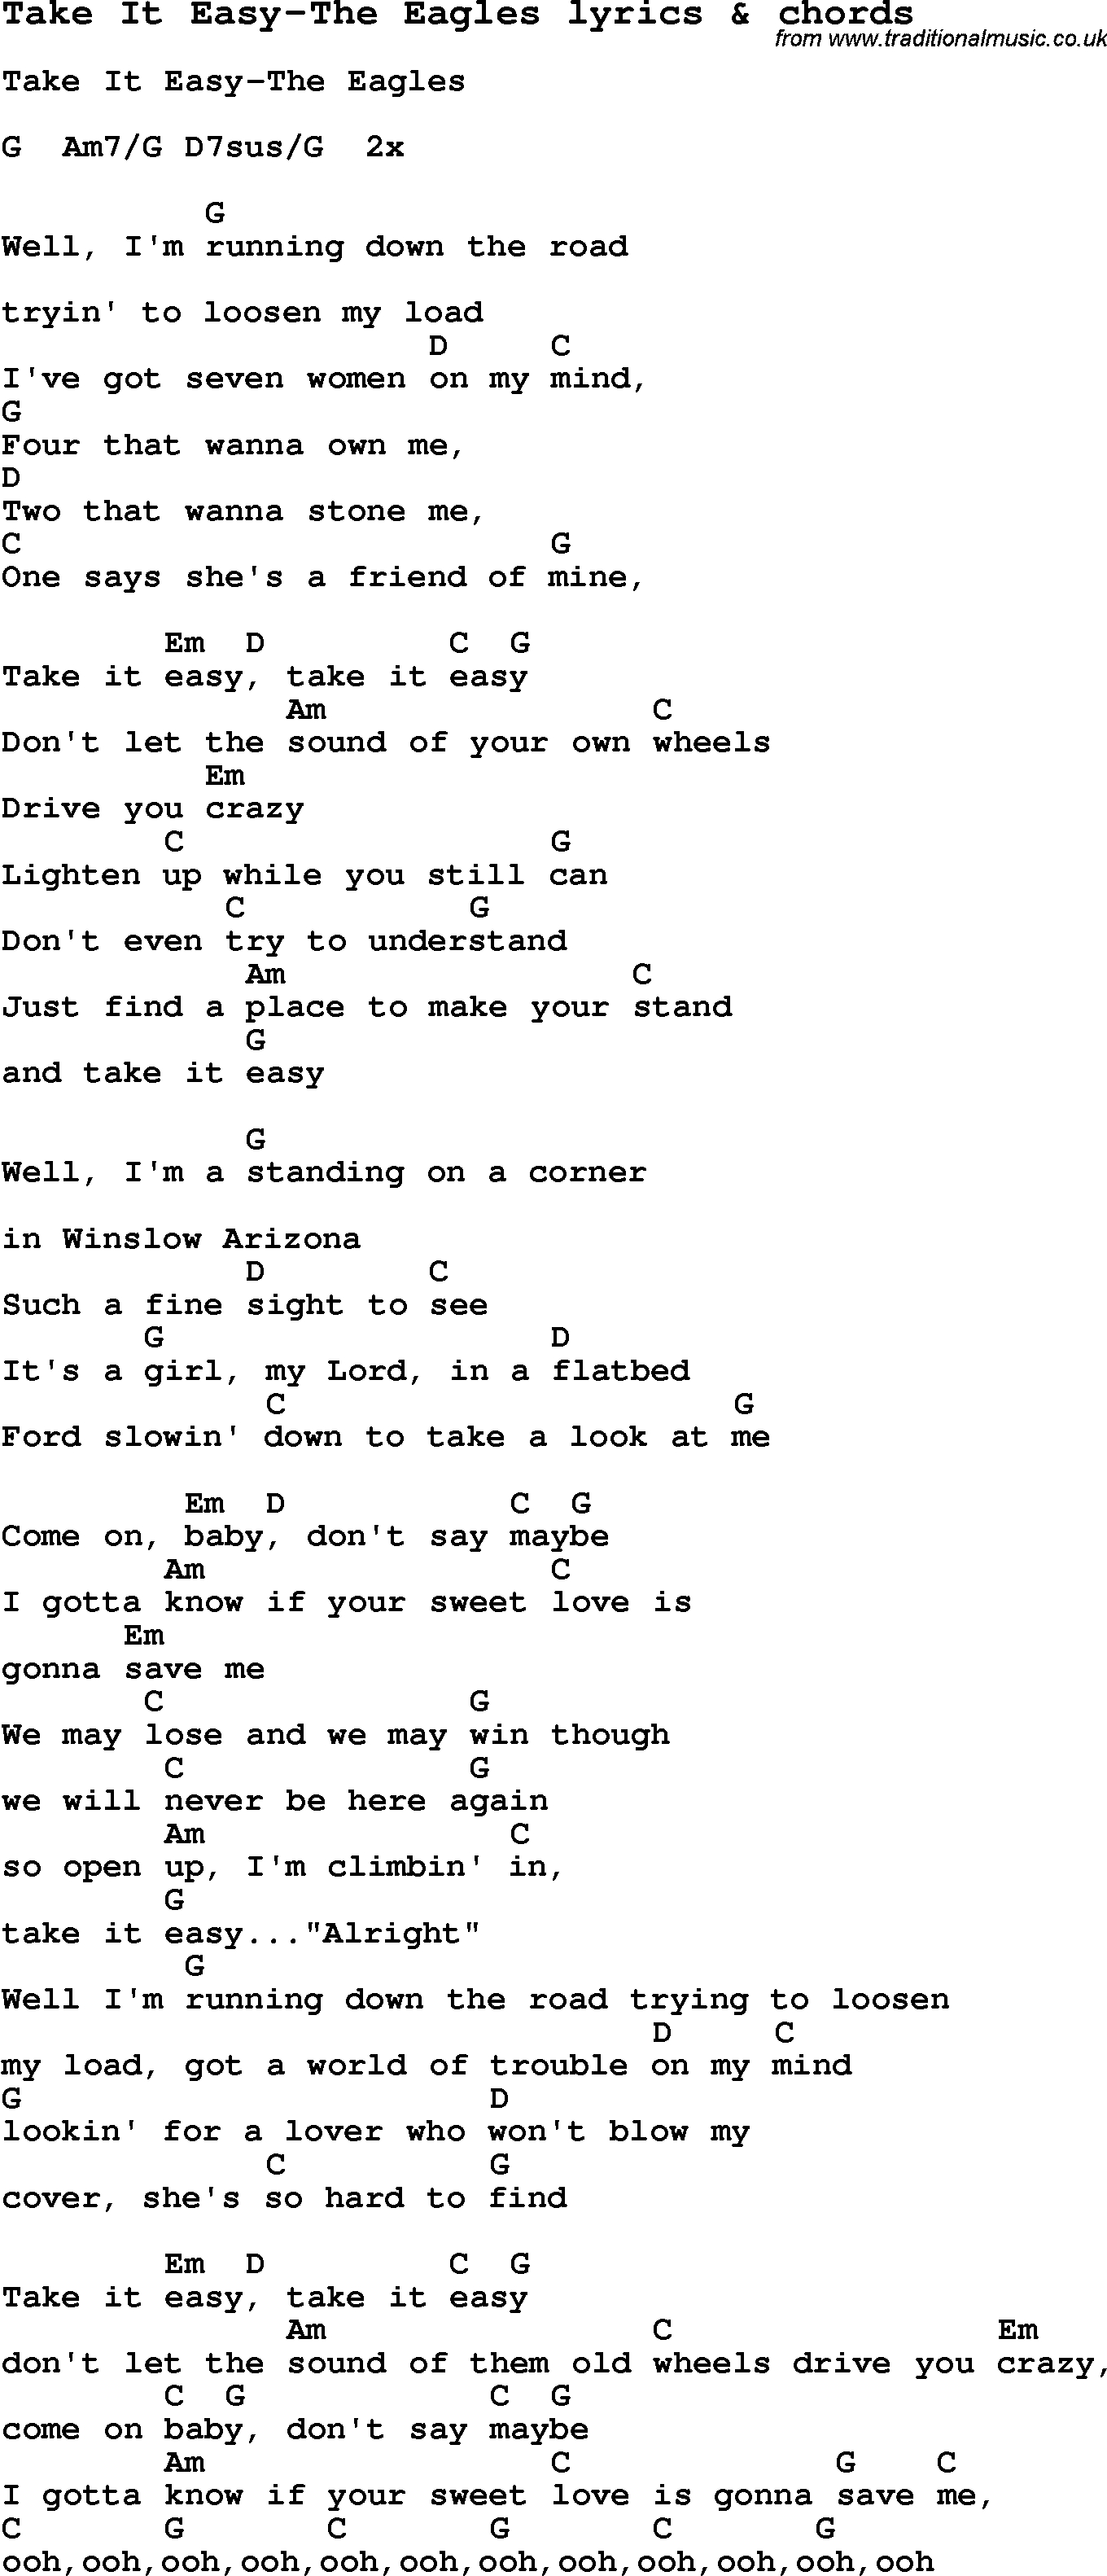 Take It Easy Chords Love Song Lyrics Fortake It Easy The Eagles With Chords